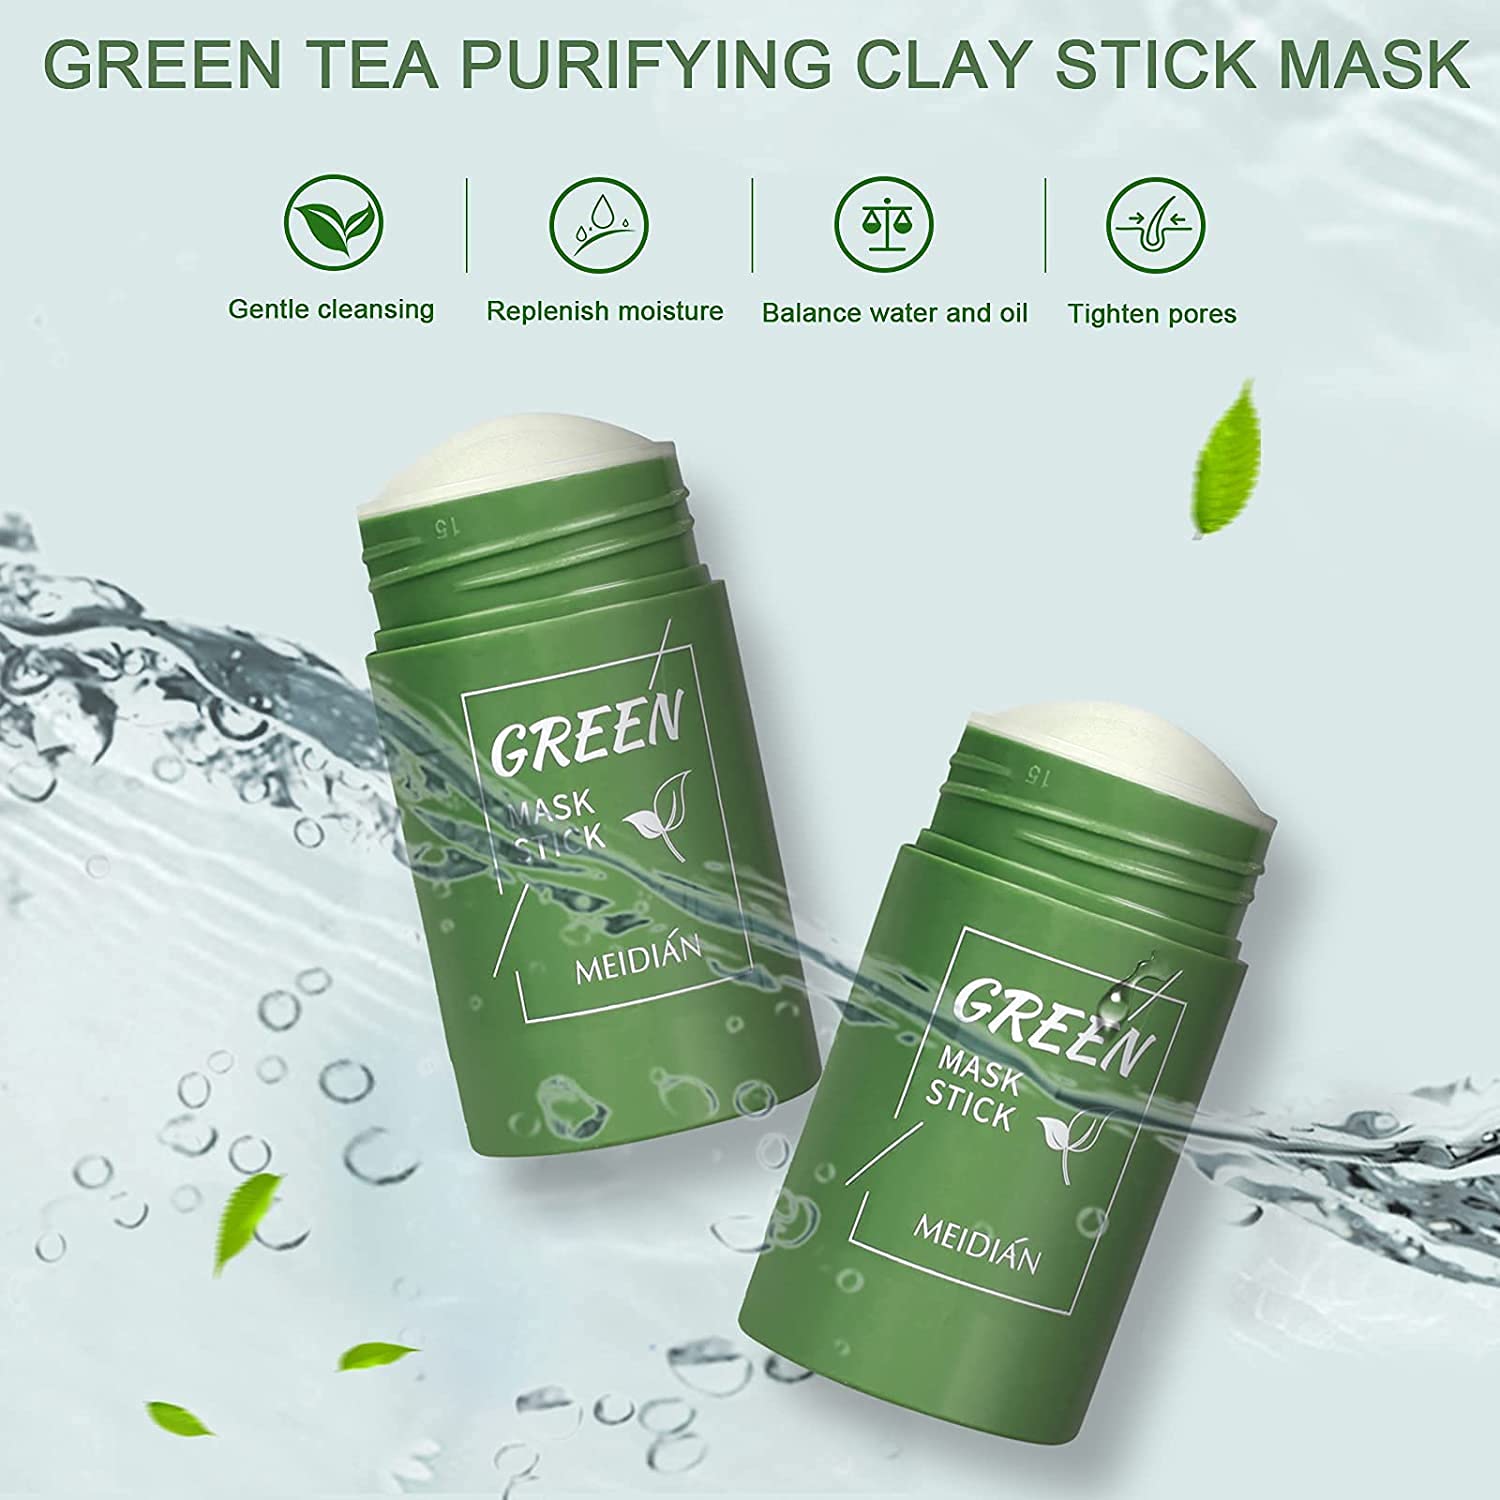 fenshine 2 Pack Green Tea Purifying Clay Stick Mask, Green Tea Cleansing Mask Blackhead Remover, Face Moisturizes Oil Control Deep Clean Pore for All Skin Types Men Women